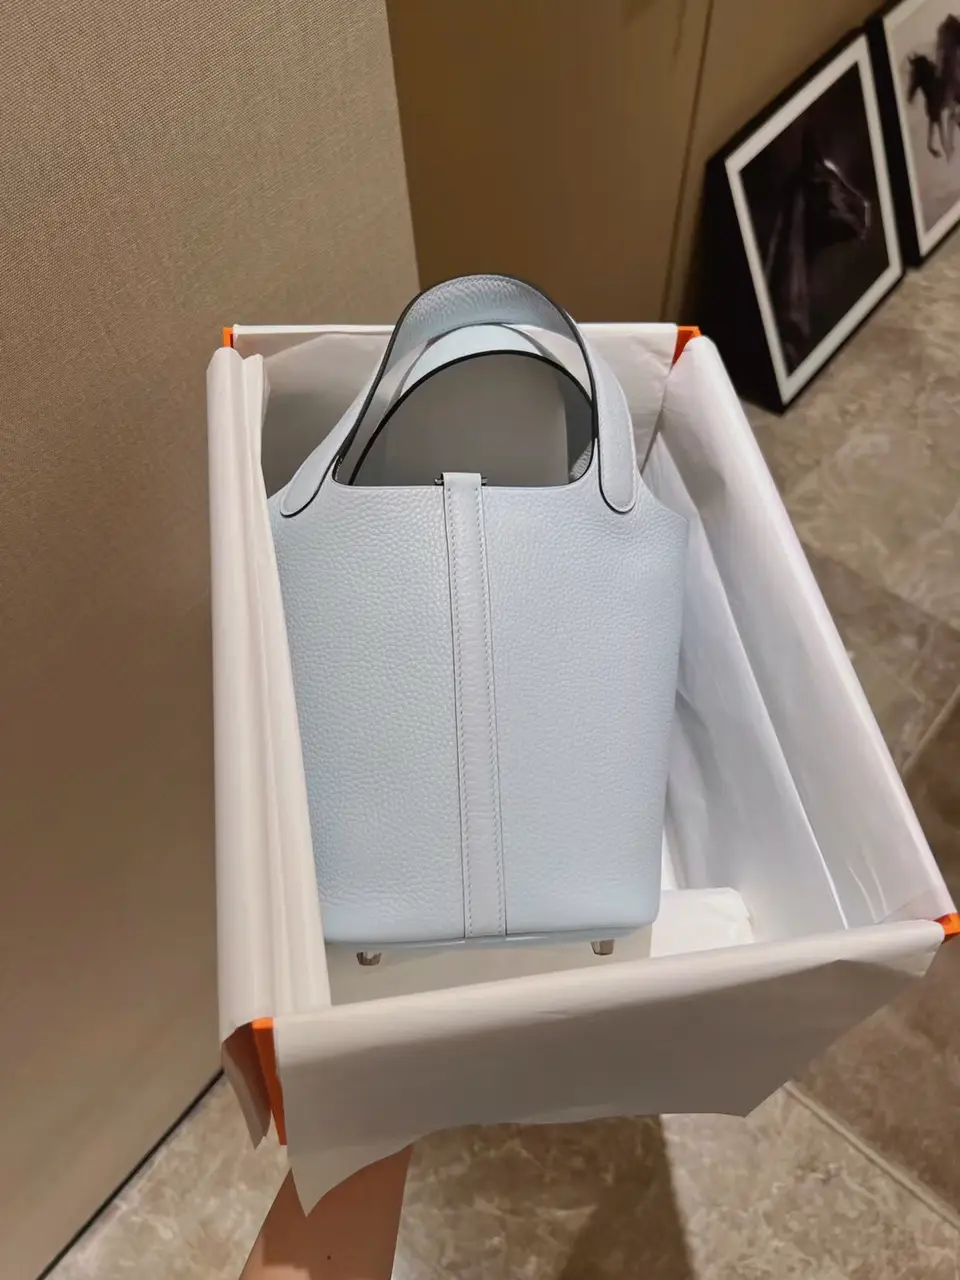 HERMES PICOTIN 18: UNBOXING & REVIEW  is it worth it? price, pros & cons 